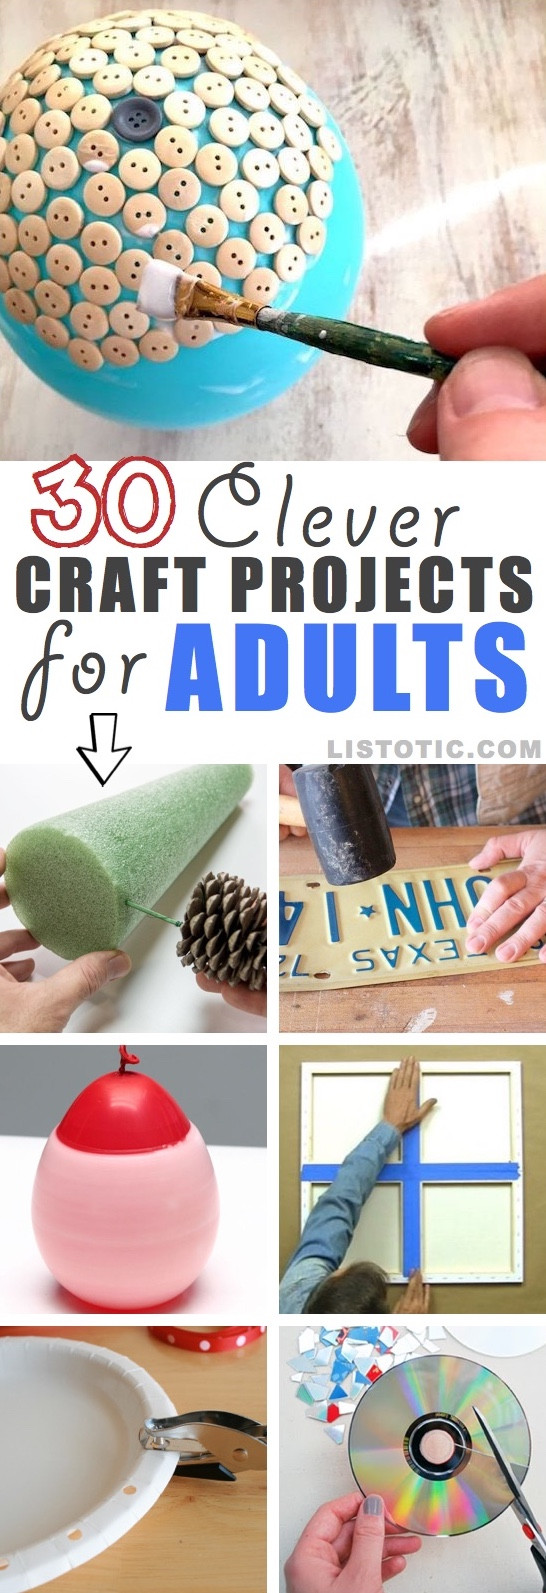 DIY For Adults
 Easy DIY Craft Ideas That Will Spark Your Creativity for